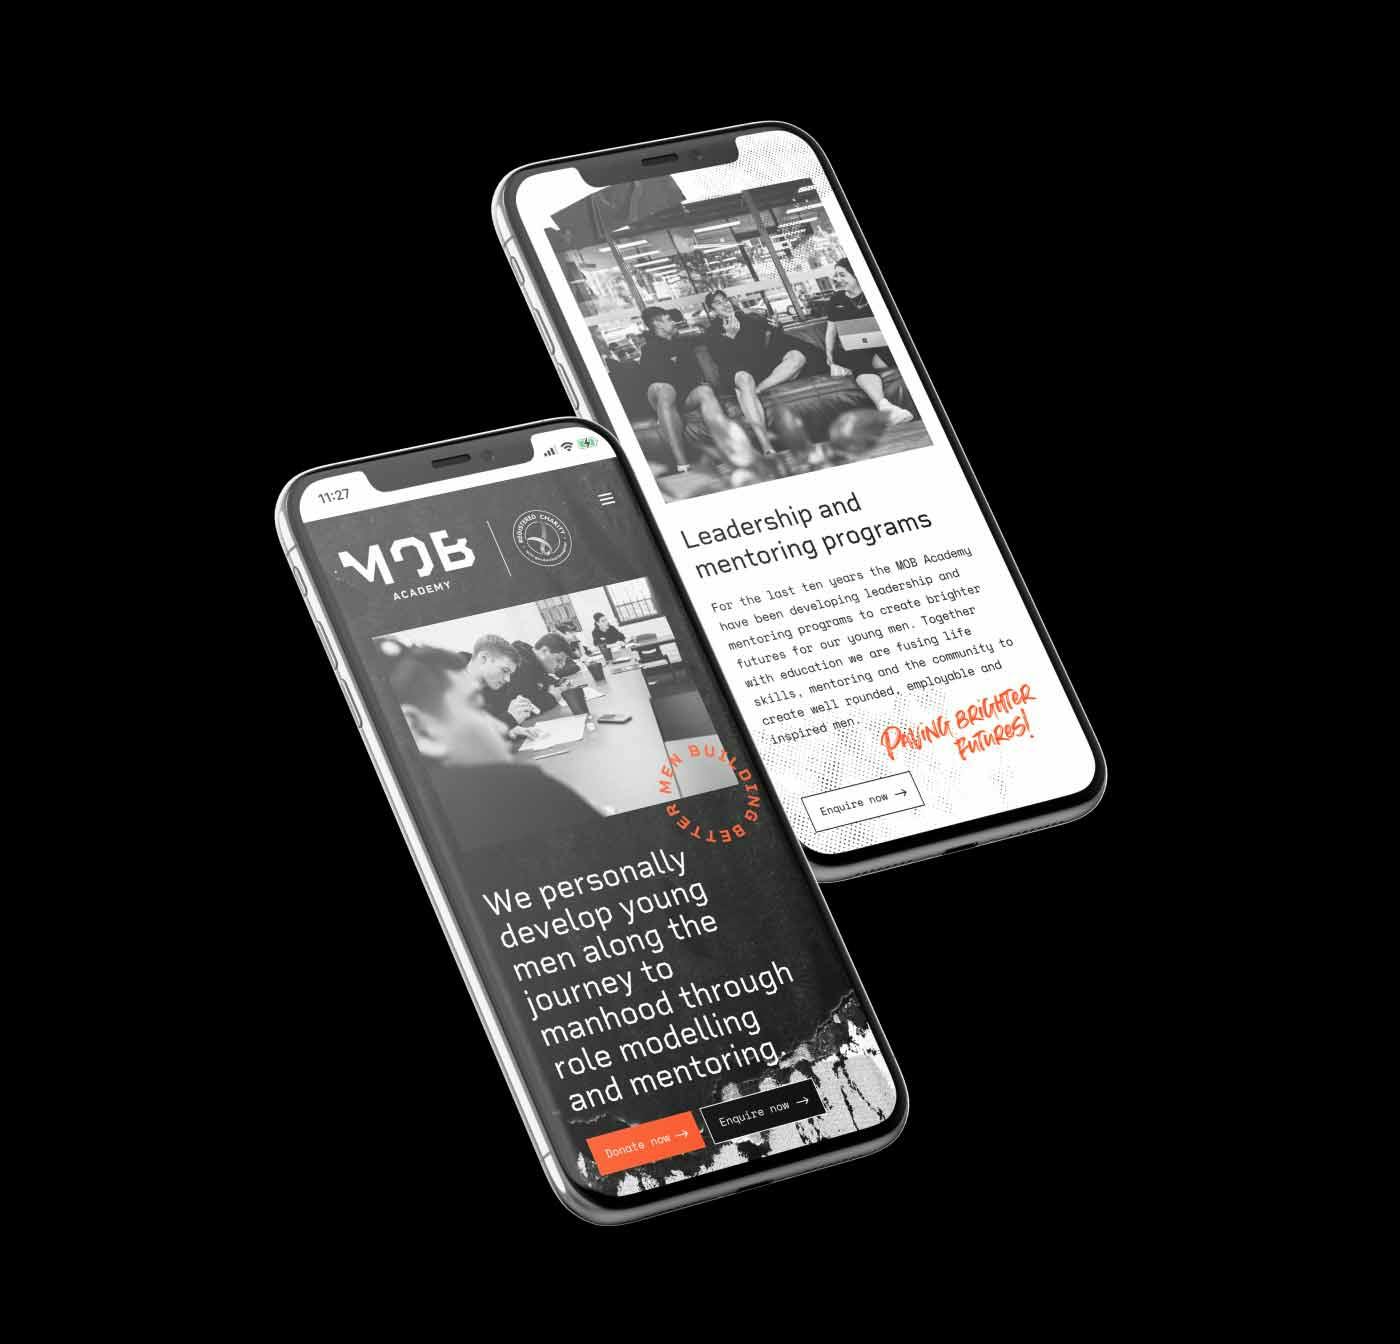 Men of Business Academy website displayed on two mobile phones